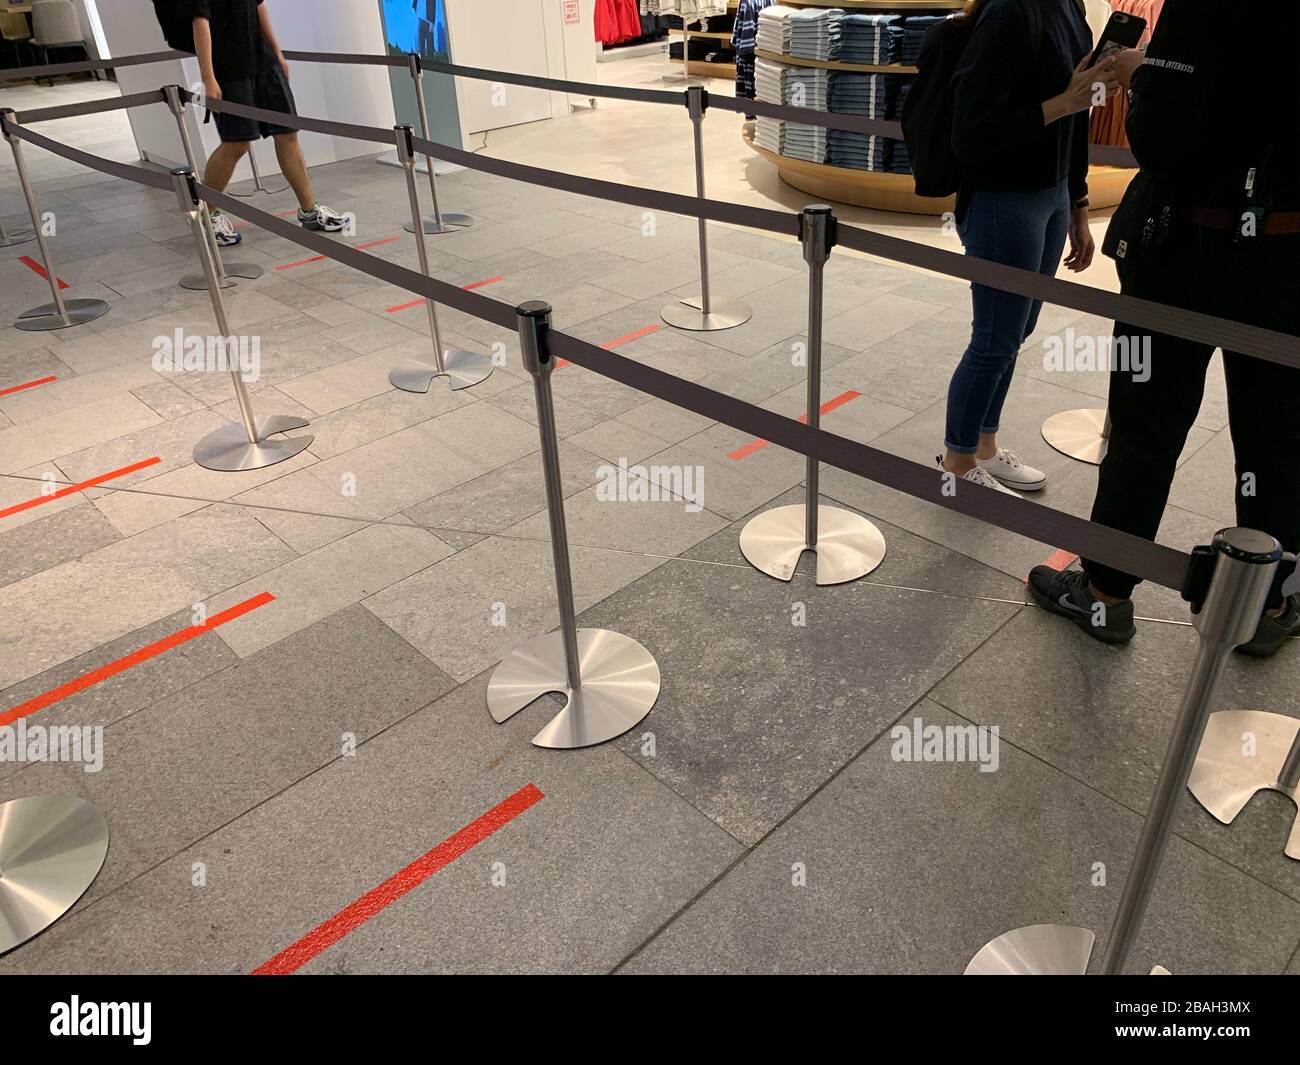 The Uniqlo flagship store implements social distancing on March 27, 2020 in  Orchard Road in Singapore. Singapore introduced fines and potential jail  sentences for people ignoring social distancing guidelines. Before entering  this